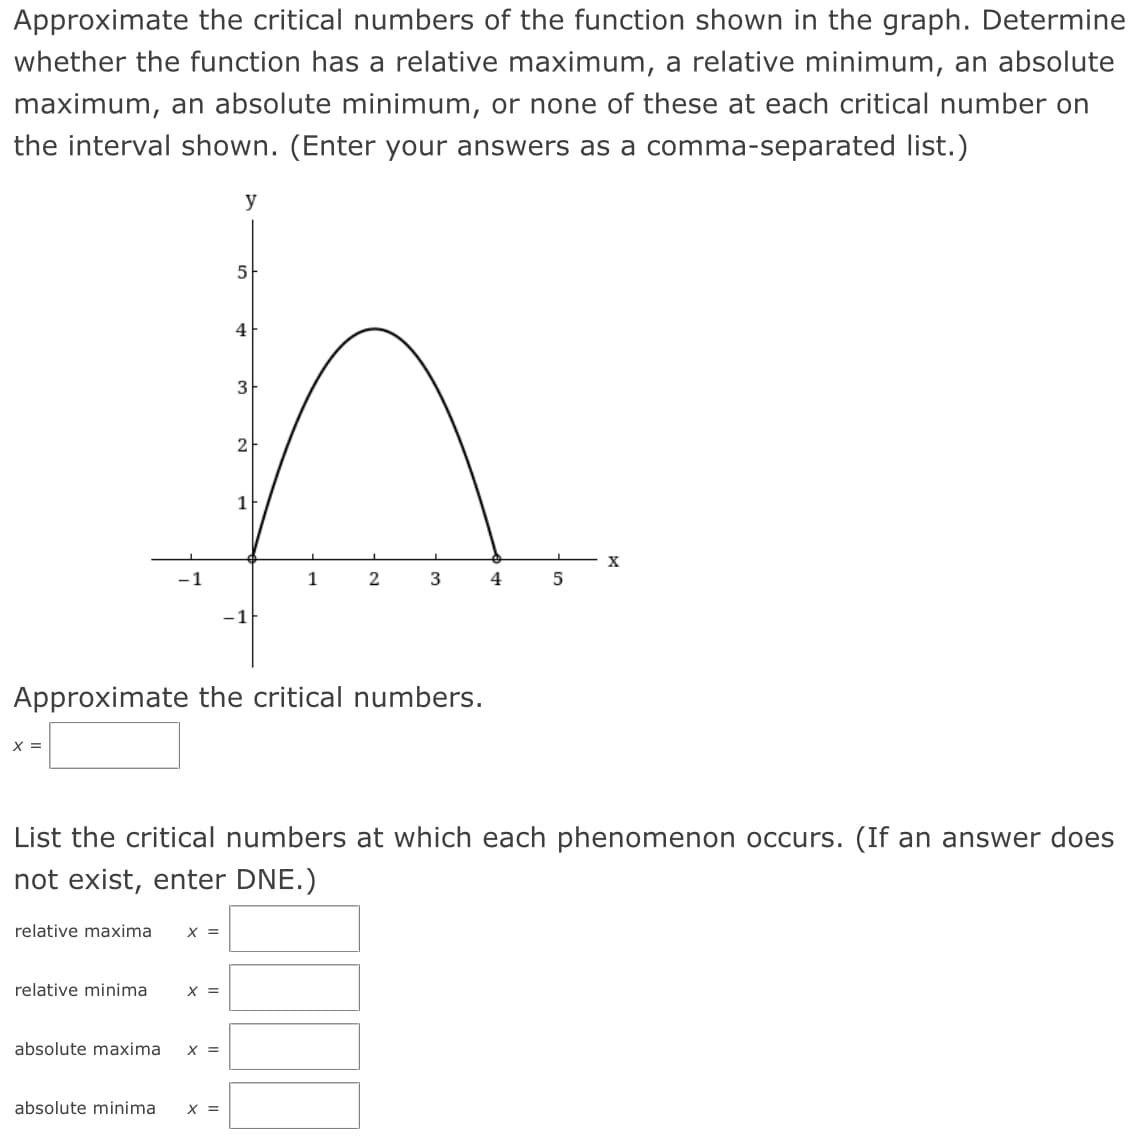 Approximate the critical numbers of the function shown in the graph. Determine
whether the function has a relative maximum, a relative minimum, an absolute
maximum, an absolute minimum, or none of these at each critical number on
the interval shown. (Enter your answers as a comma-separated list.)
y
5
4
3
2
1
1
2
Approximate the critical numbers.
X =
List the critical numbers at which each phenomenon occurs. (If an answer does
not exist, enter DNE.)
relative maxima
X =
relative minima
X =
absolute maxima
X =
absolute minima
X =
